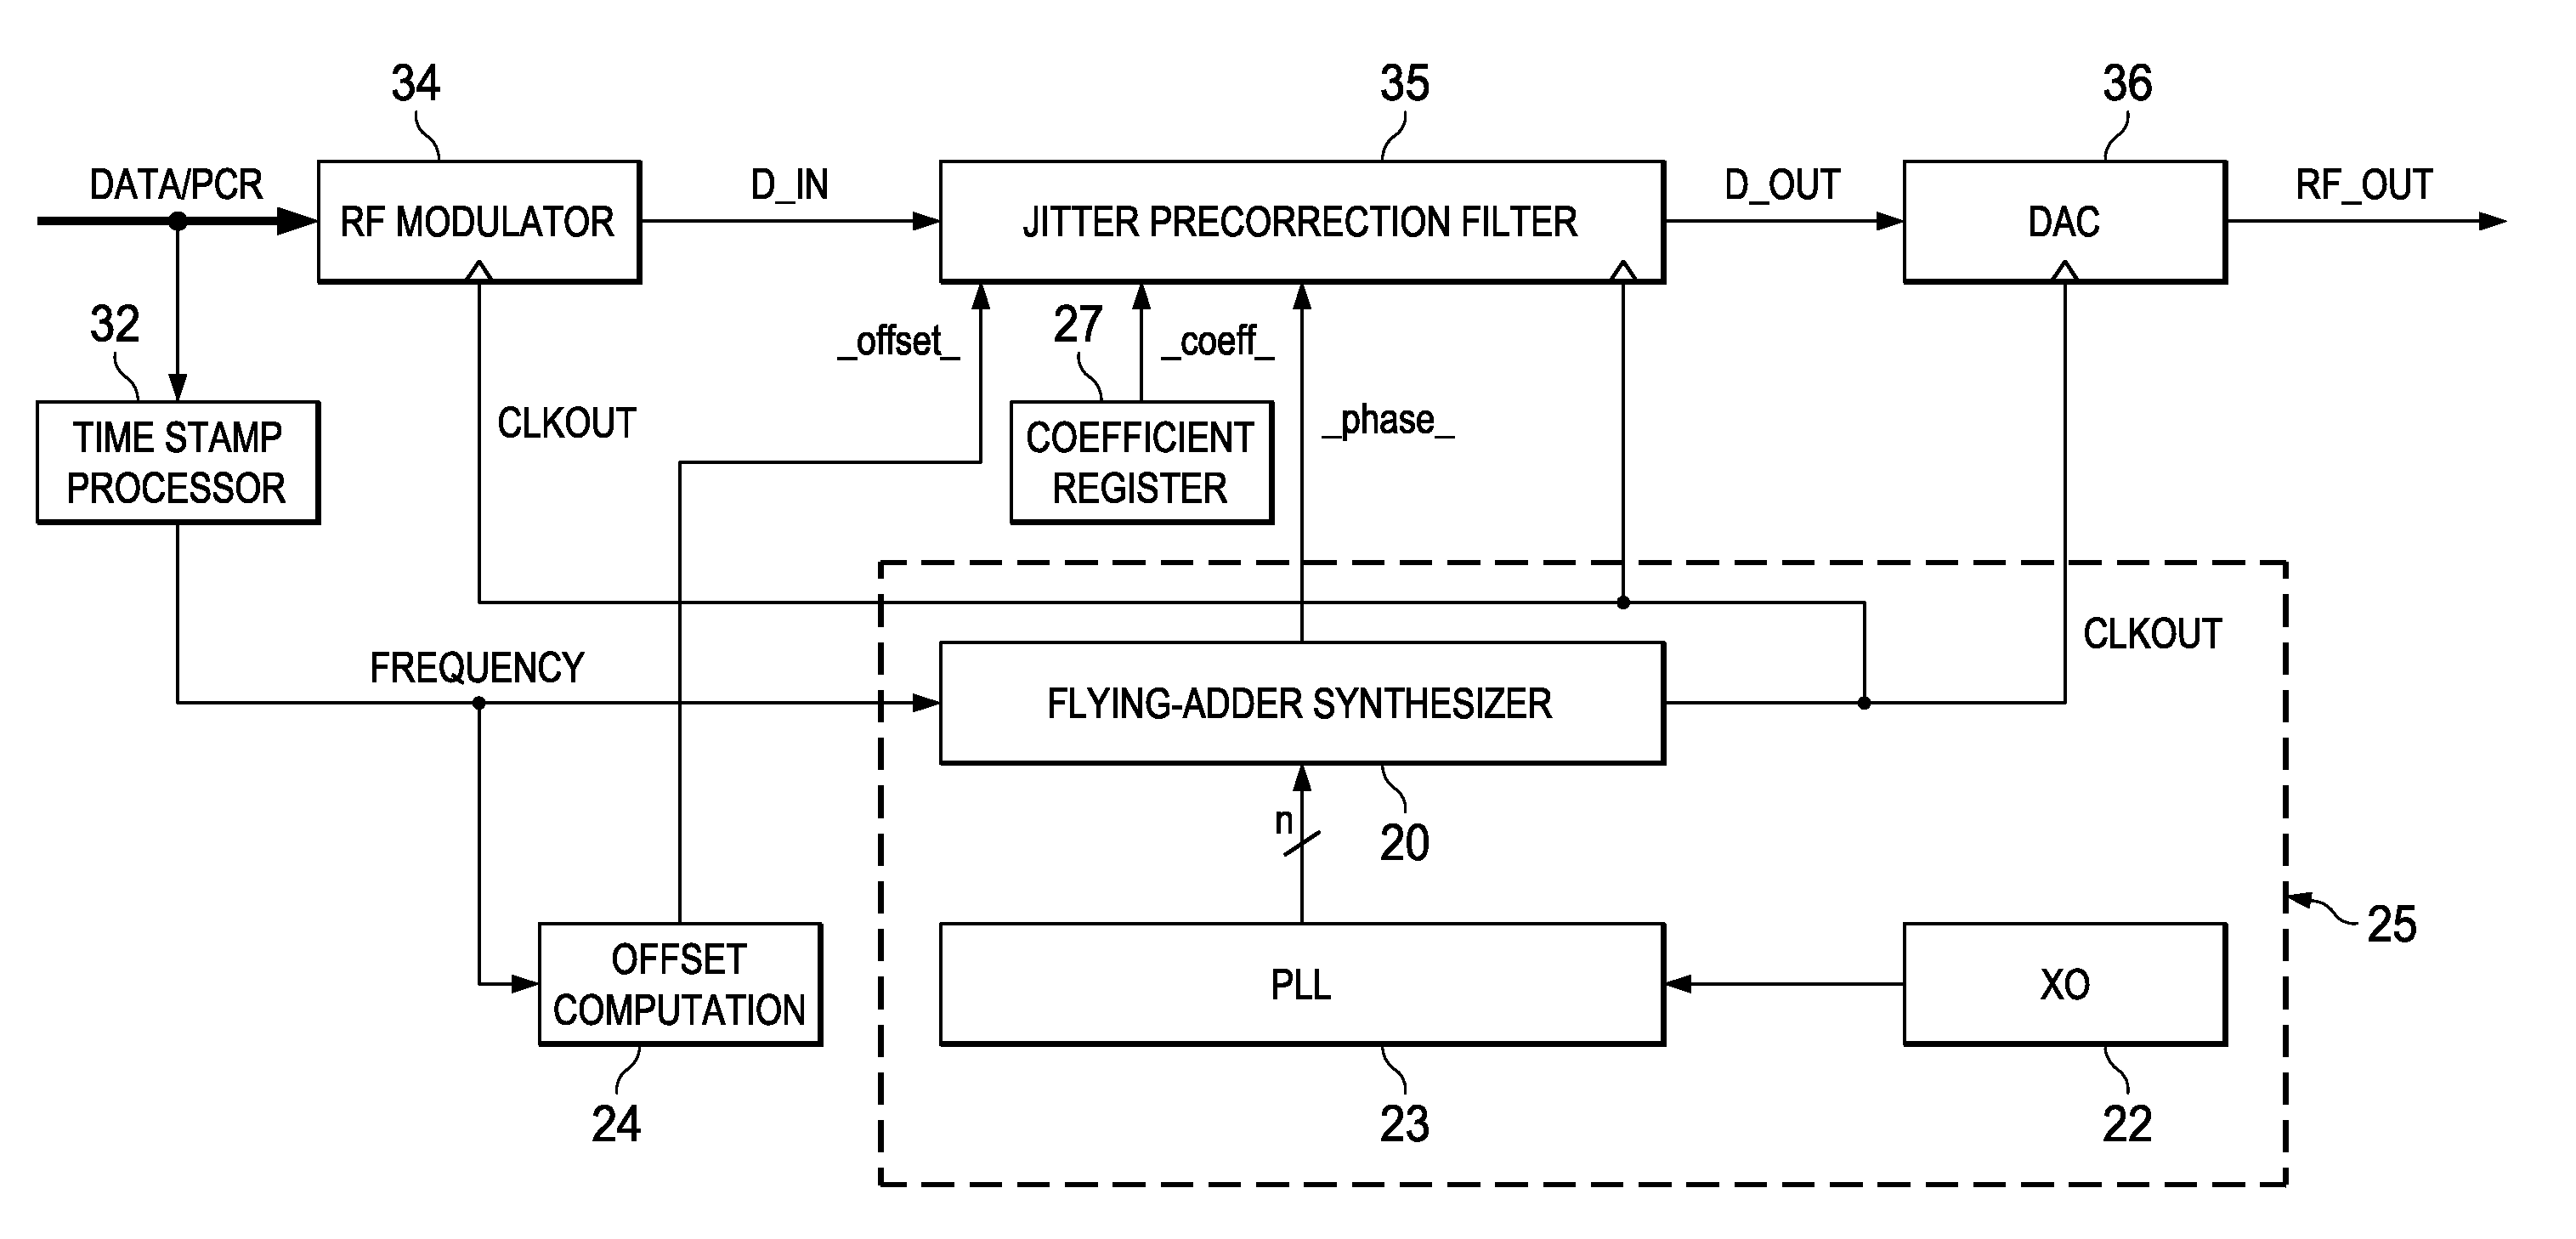 Jitter precorrection filter in time-average-frequency clocked systems